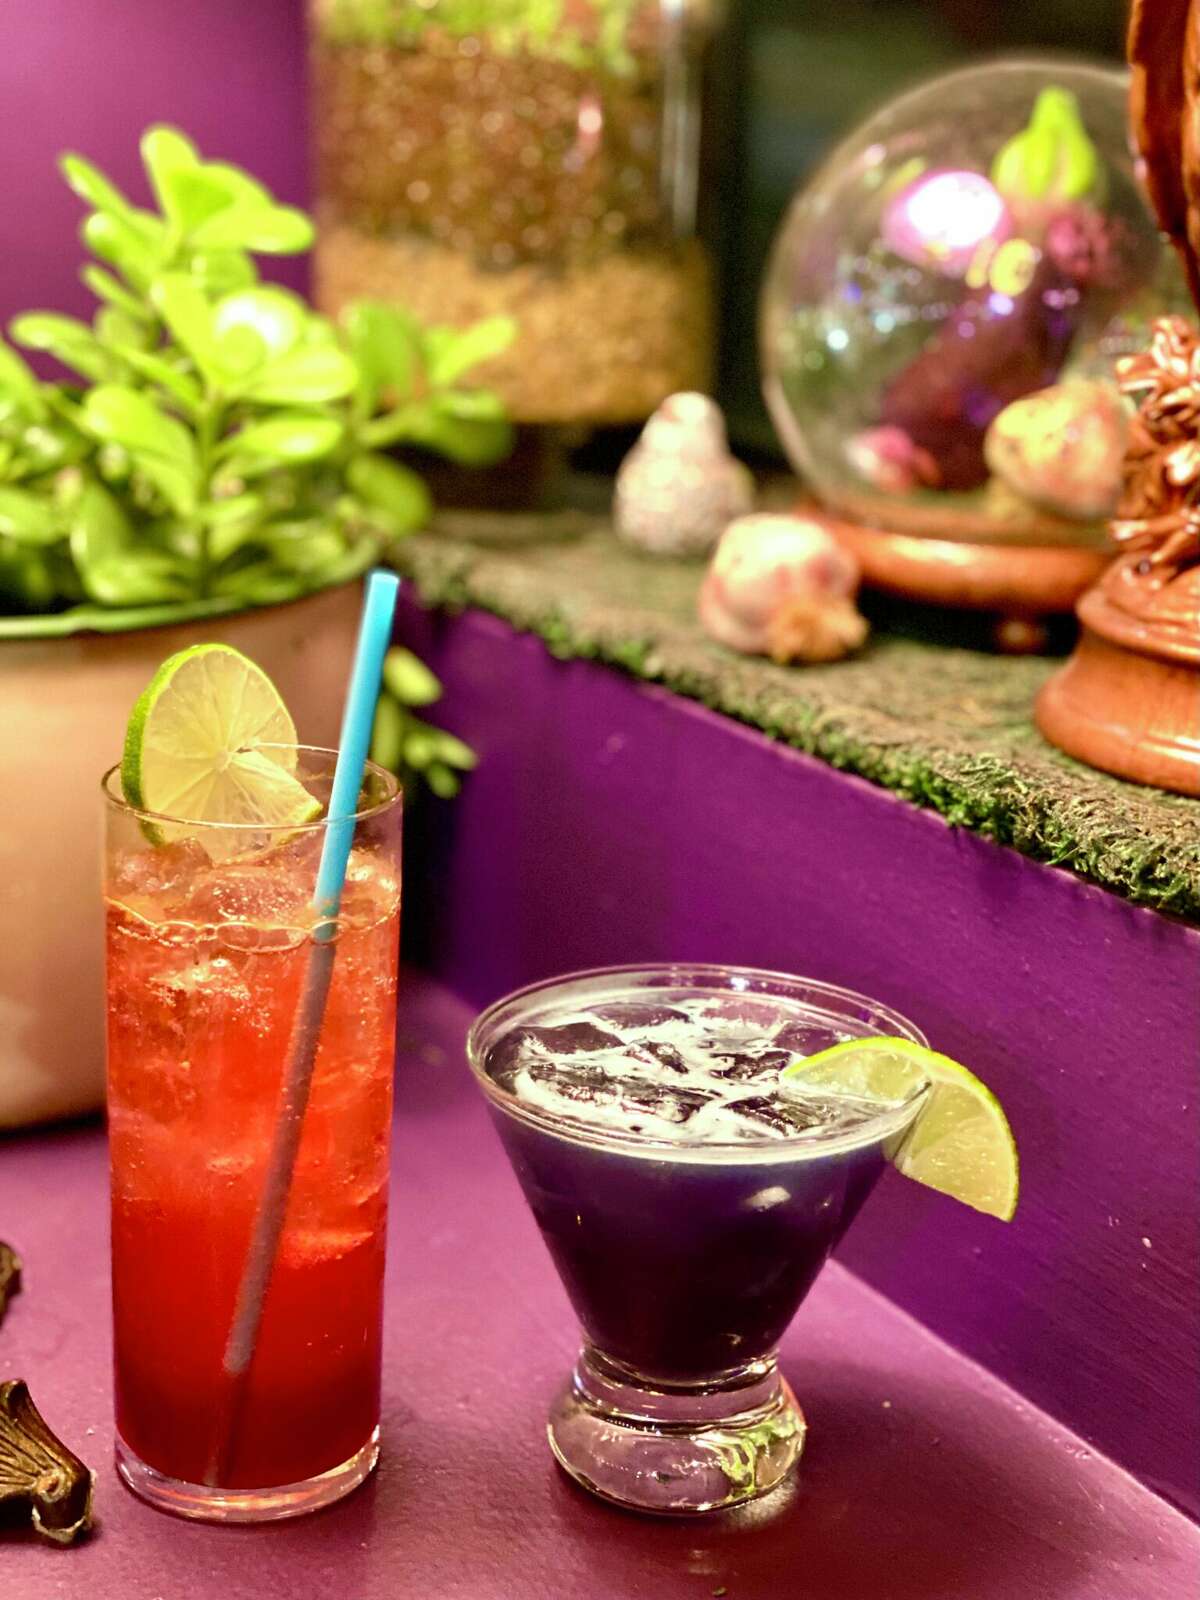 At left, the hibiscus-tinted Unbound cocktail from Wizard Burger. At the right, the restaurant's purple margarita.